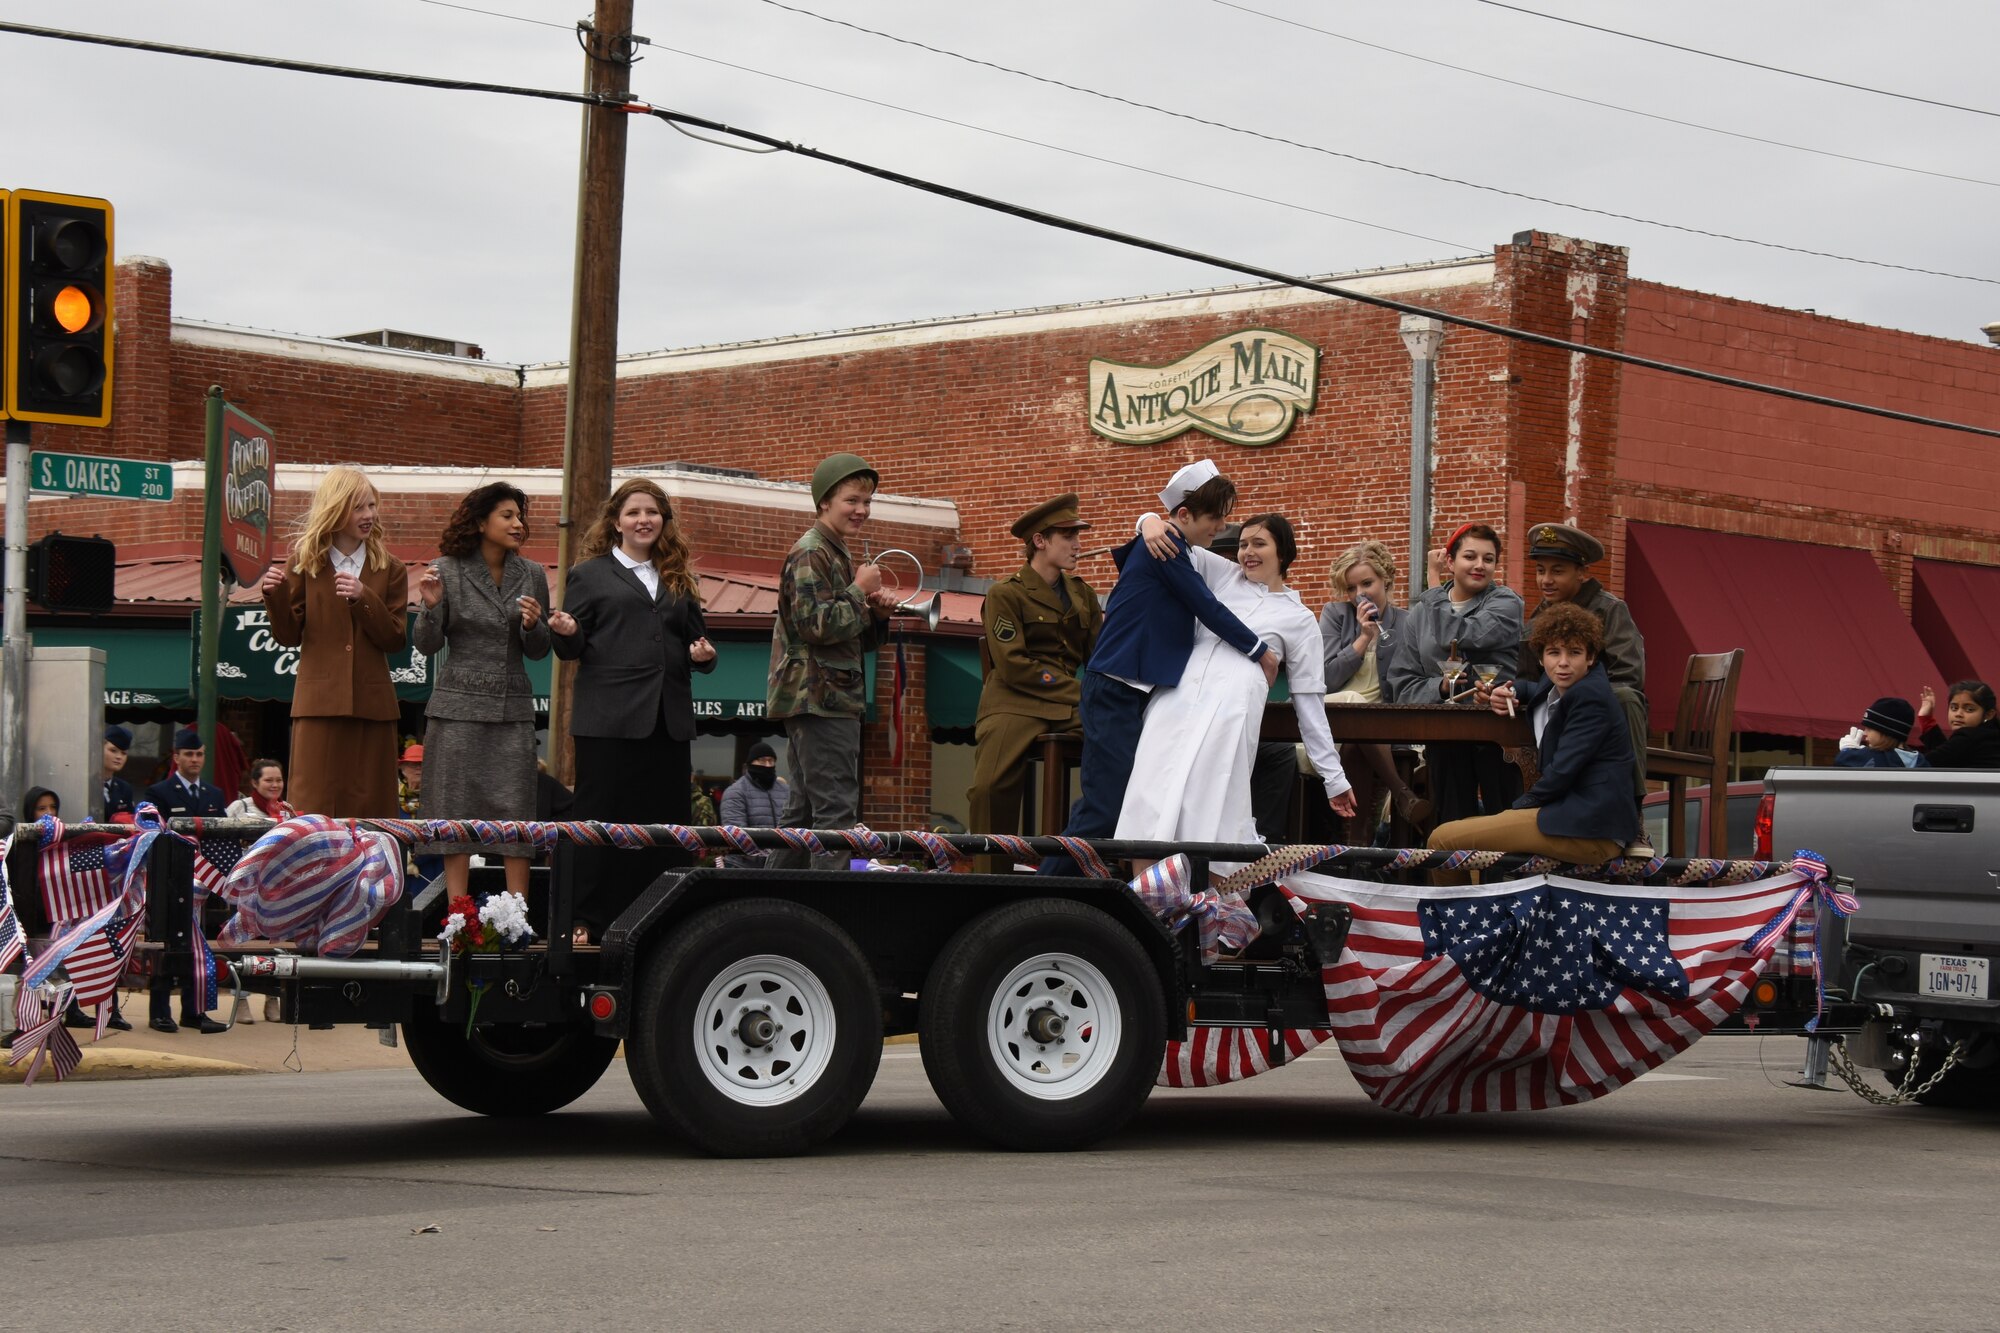 Ambleside School of San Angelo students pay tribute to all veterans with a flashback to the ‘40s during the Veterans Day Parade in San Angelo, Texas, Nov. 10, 2018. The students dressed as famous figures including Marilyn Monroe, the Andrew Sisters, a Tuskegee Airman, Rosie the Riveter and the V-J Day kiss. (U.S. Air Force photo by Airman 1st Class Zachary Chapman/Released)